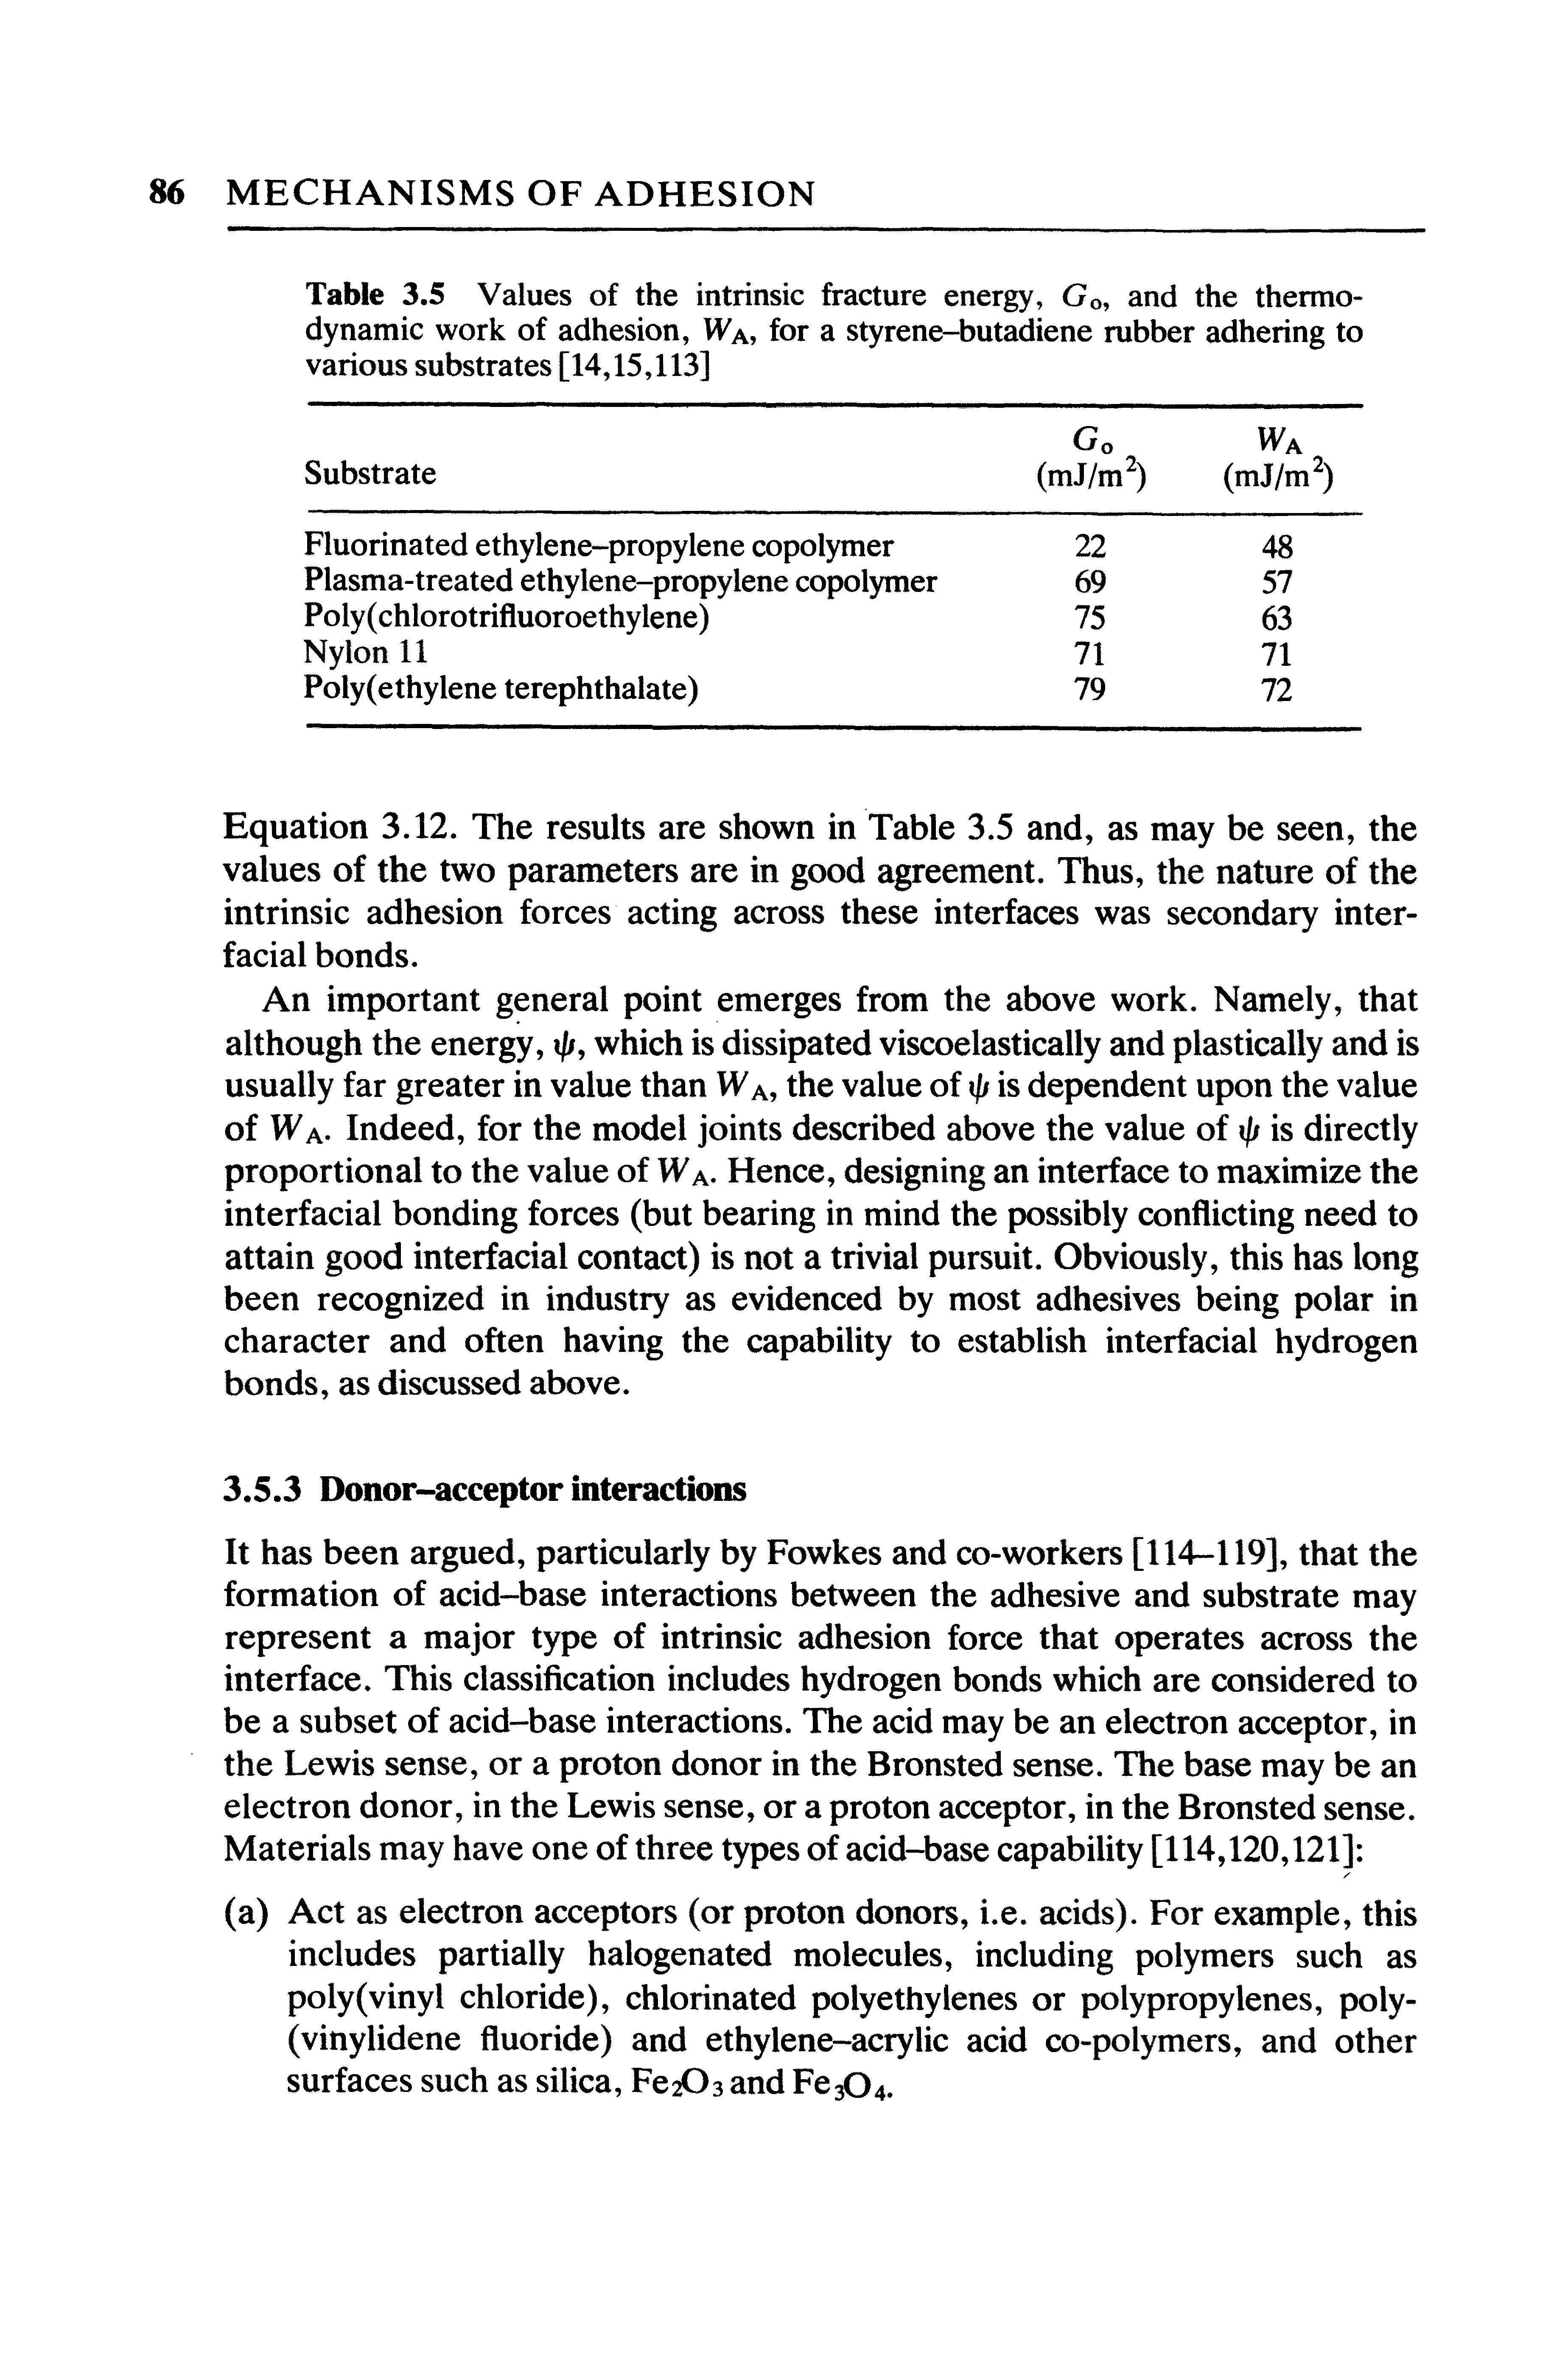 Table 3.5 Values of the intrinsic fracture energy, Go, and the thermodynamic work of adhesion, Wa, for a styrene-butadiene rubber adhering to various substrates [14,15,113]...